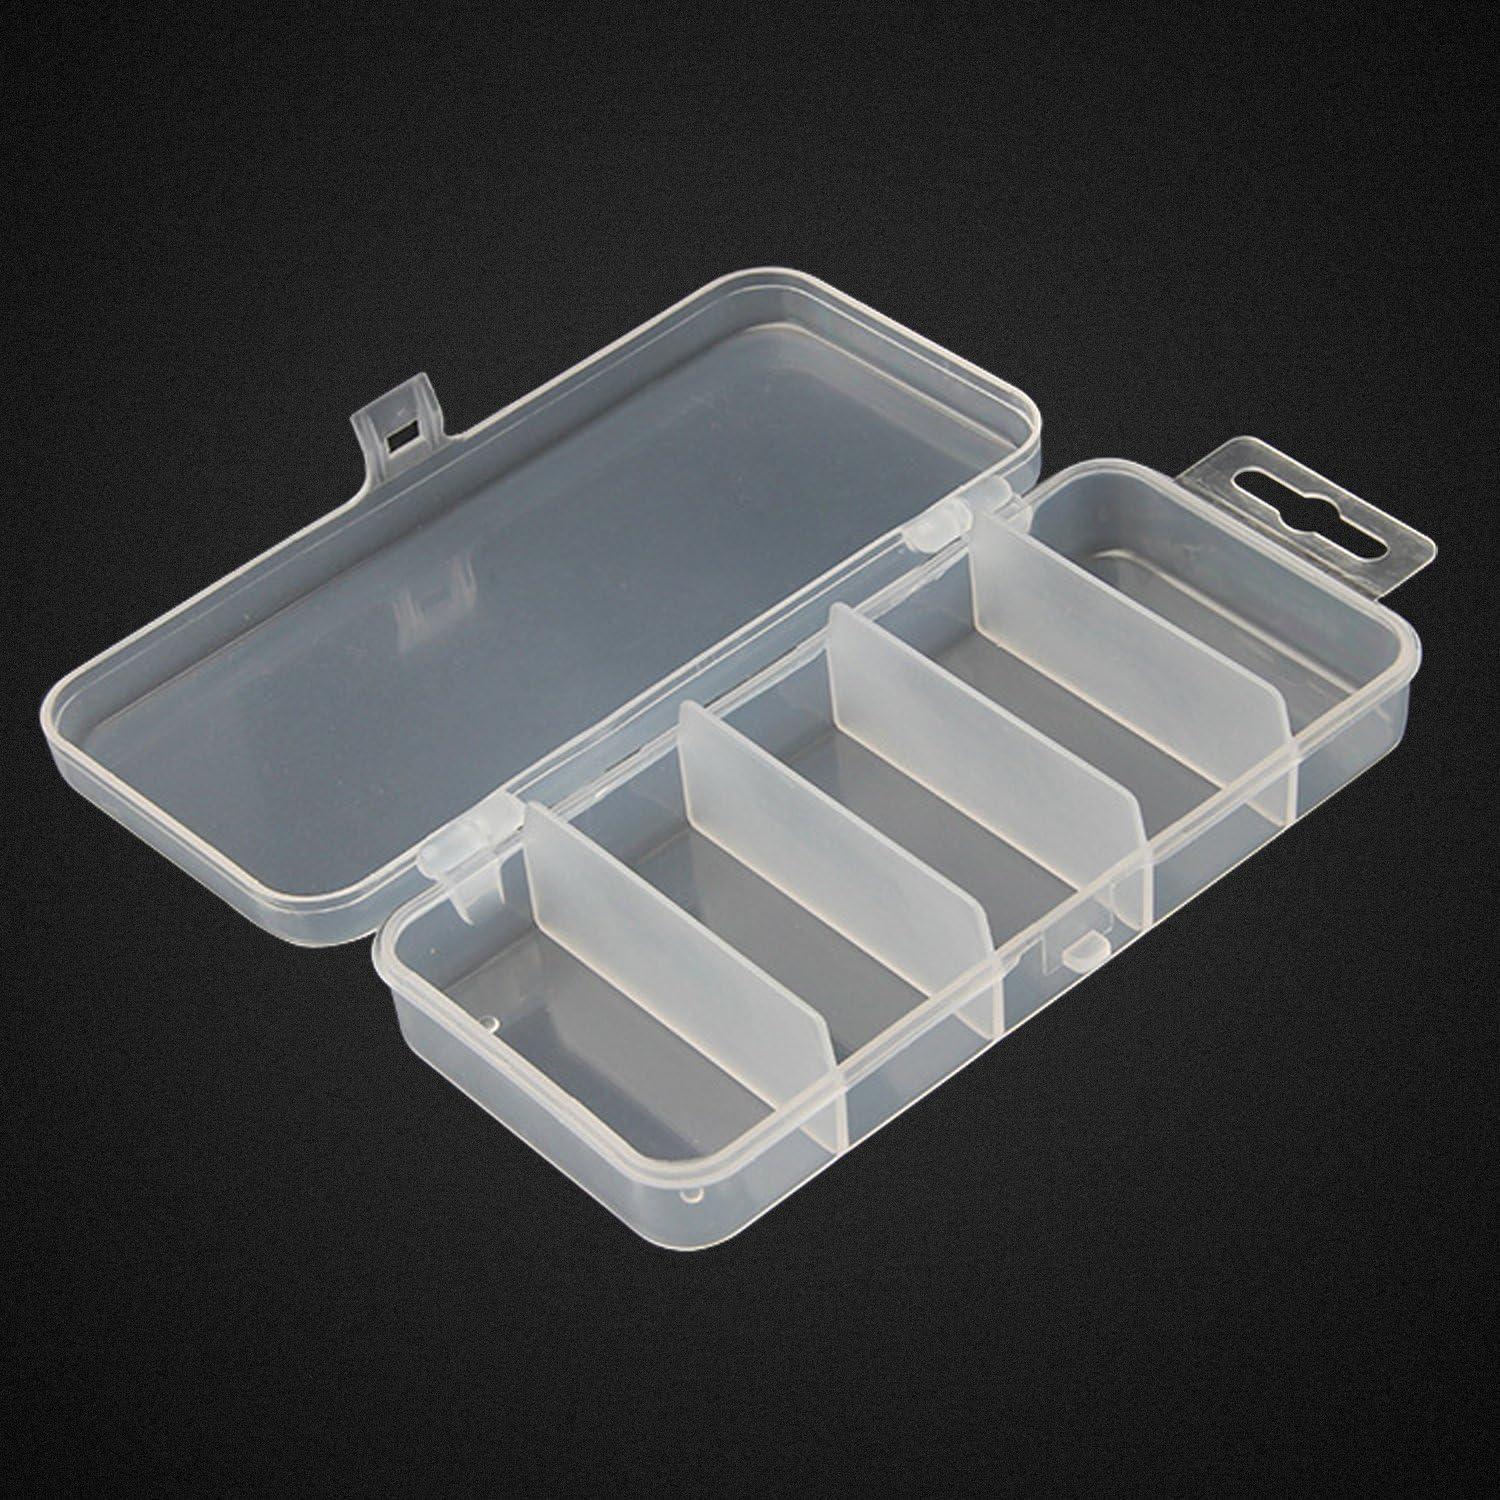 Honbay 2PCS 5x2.4x1Inch Small Clear Visible Plastic Fishing Tackle  Accessory Box Fishing Lure Bait Hooks Storage Box Case Container Jewelry  Making Findings Organizer Box Storage Container Case